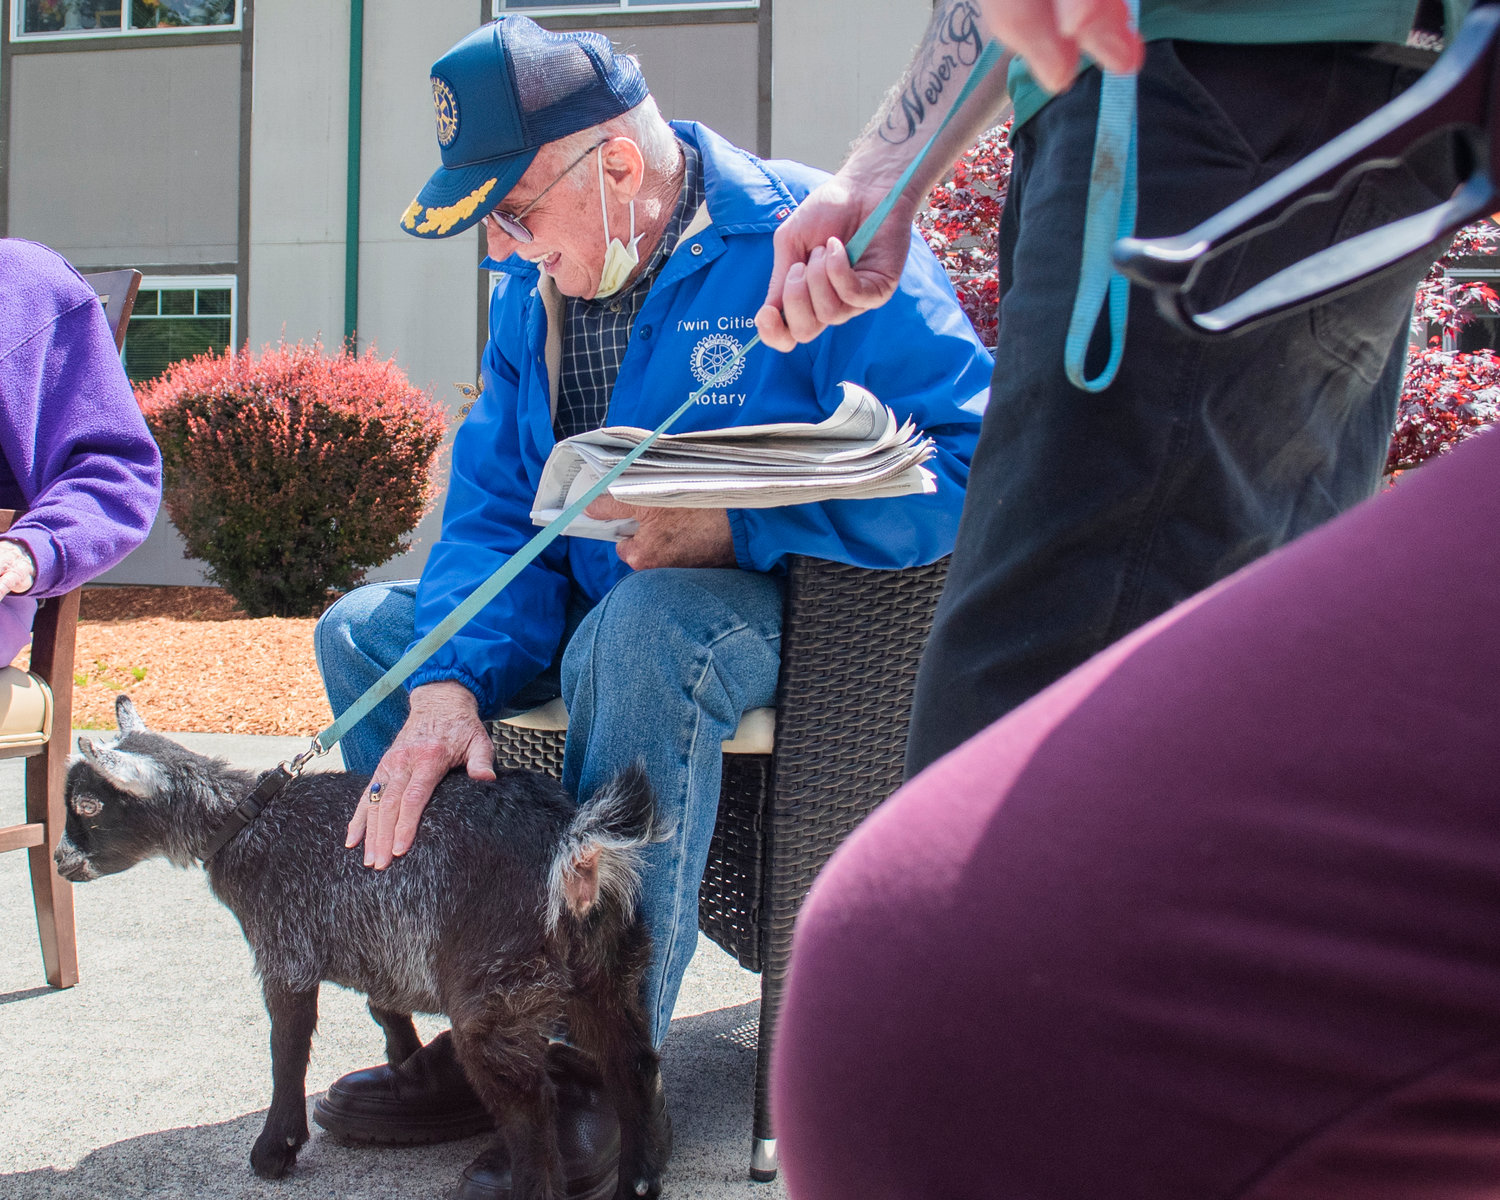 Bill Logan smiles while holding a copy of The Chronicle and petting a pygmy goat at Woodland Village Concepts of Chehalis Thursday afternoon.